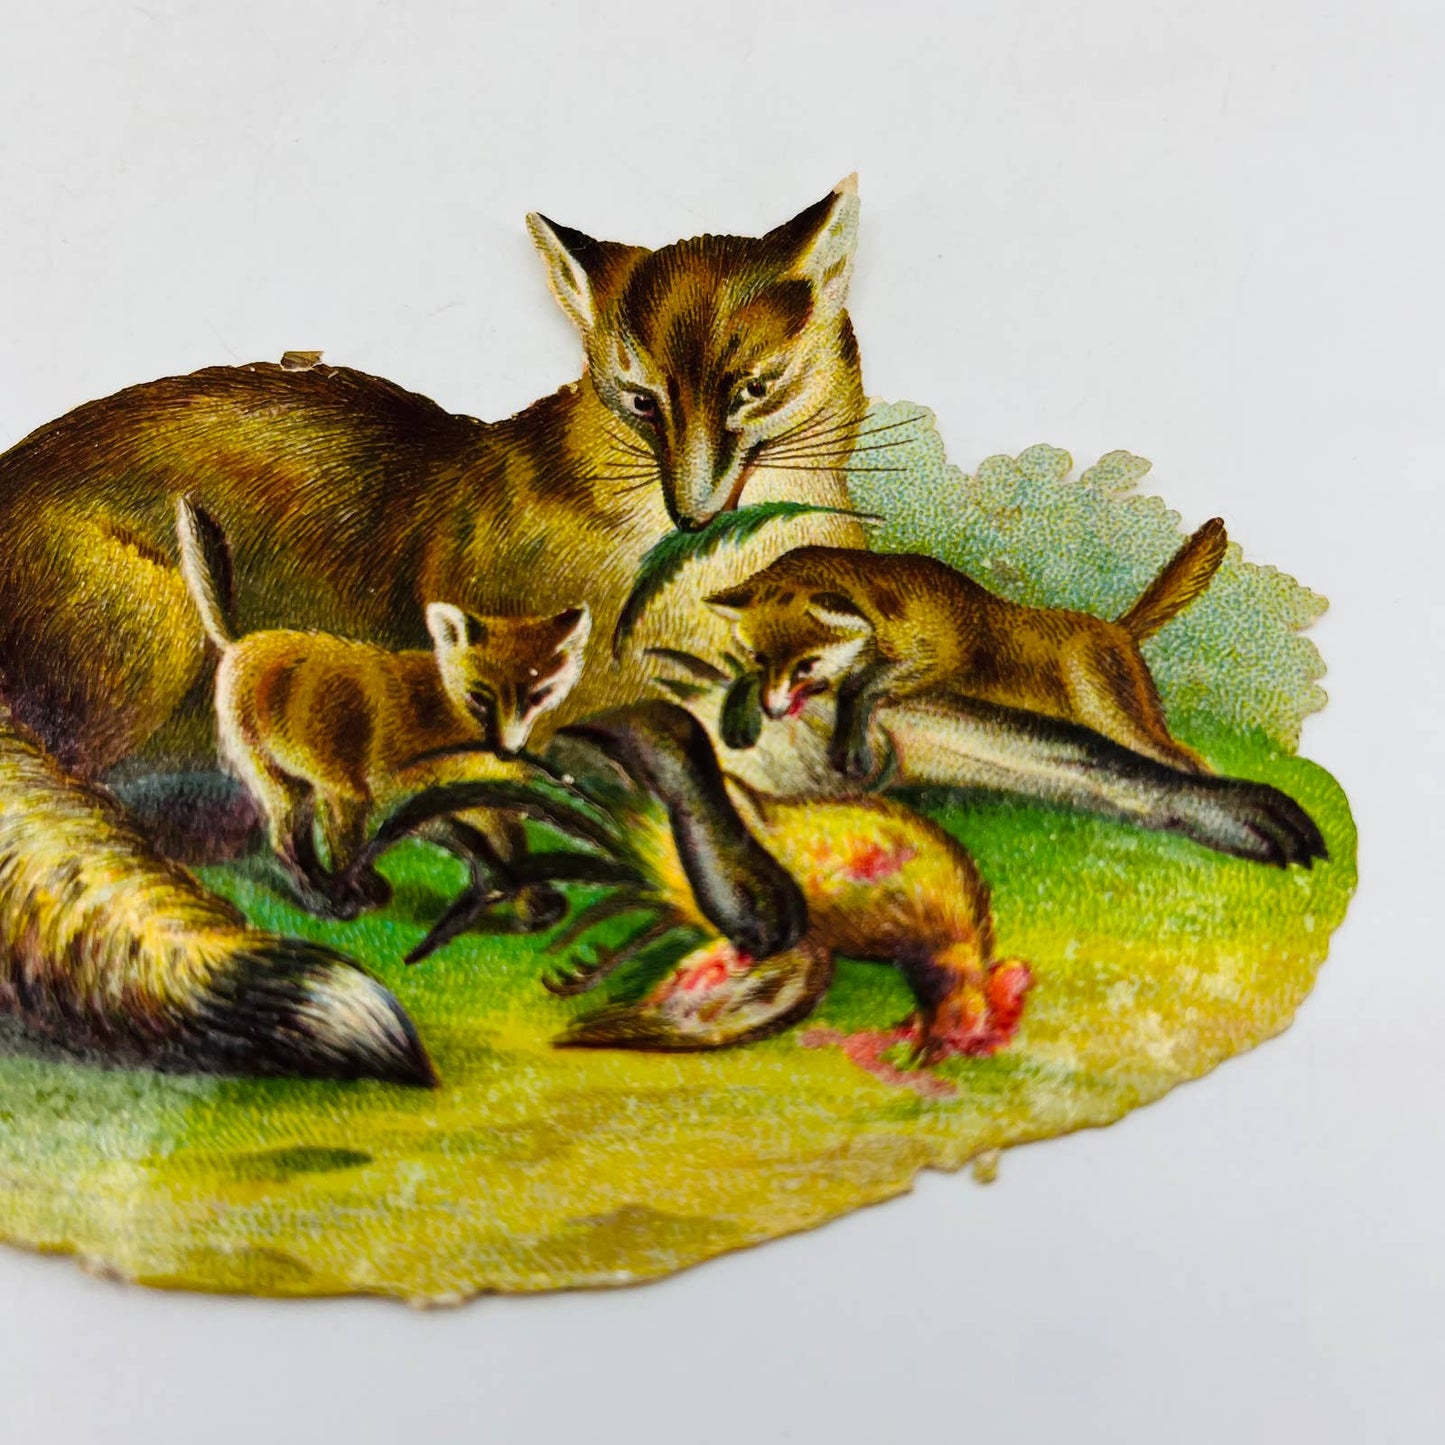 1880s Embossed Victorian Die Cut Fox with 2 Kits and Dead Chicken 3 x 4.5” AA2